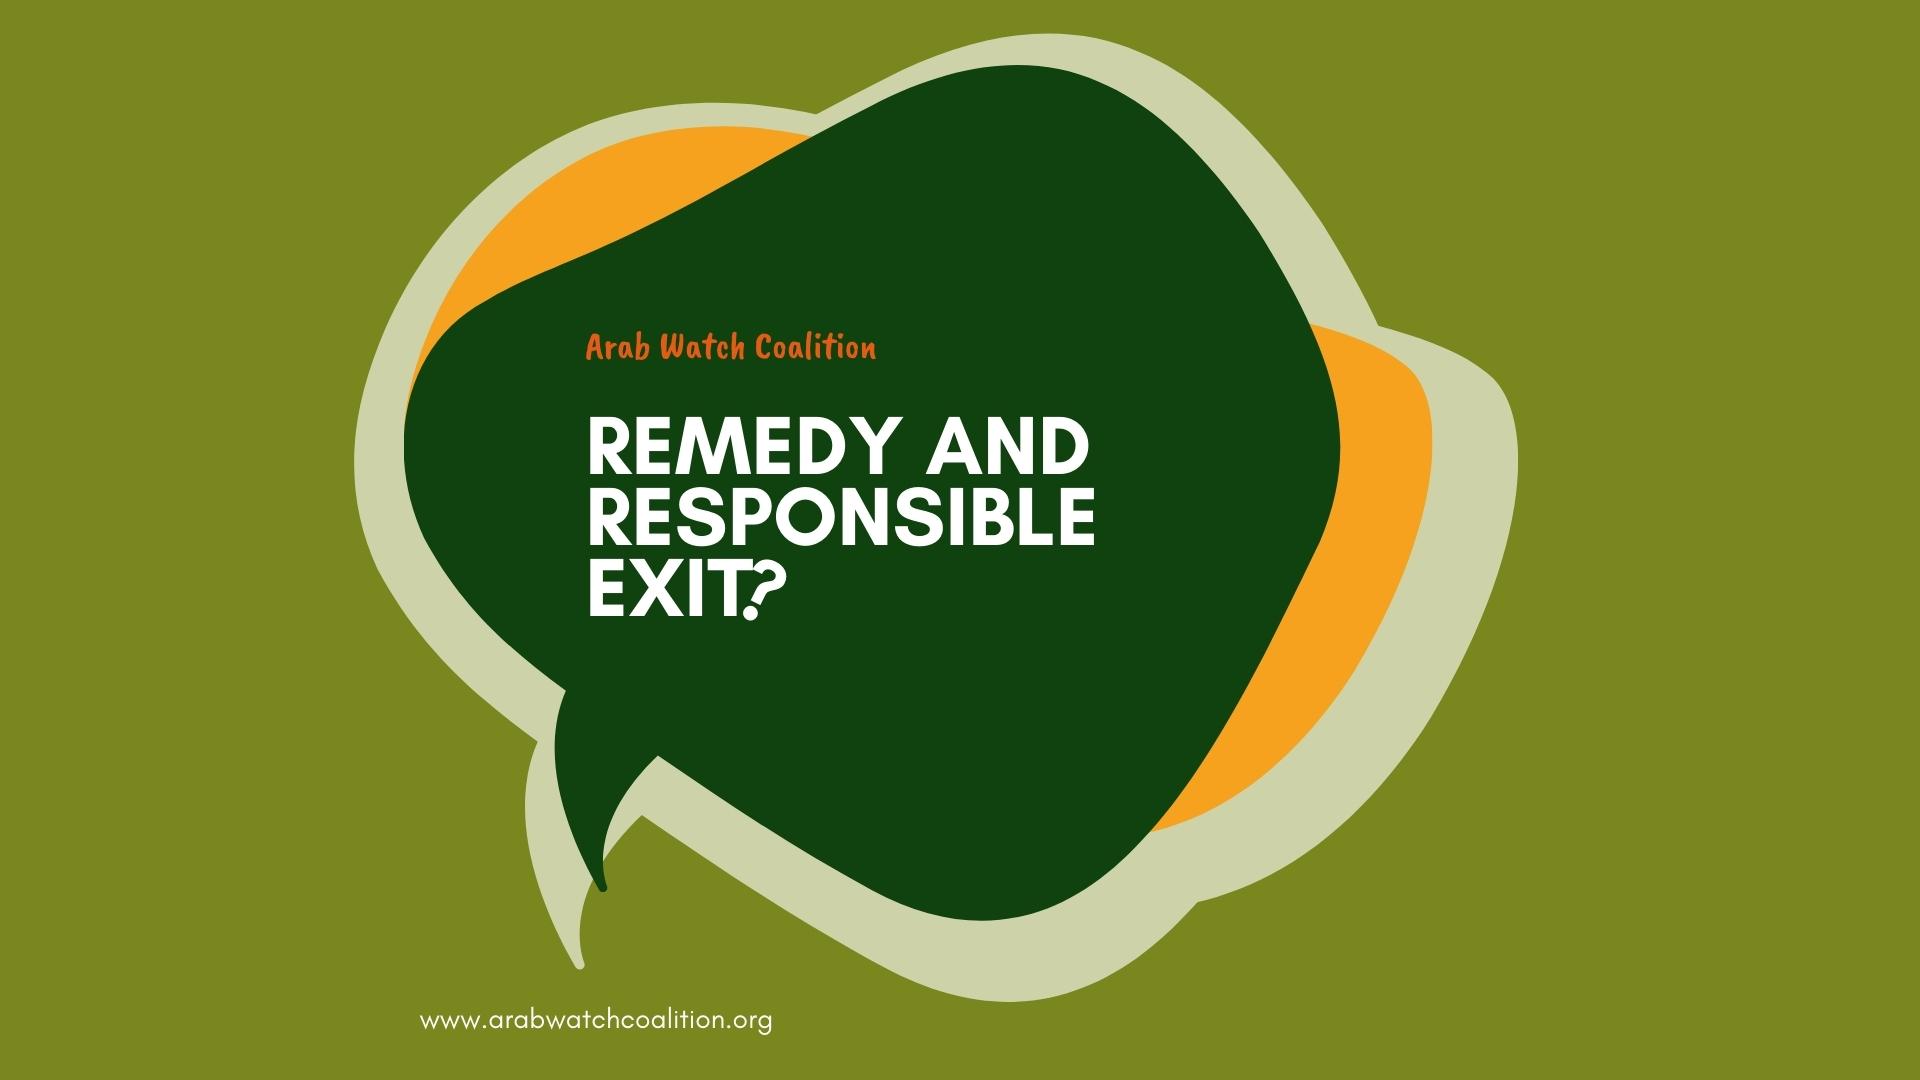 The Remedy and Responsible Exit Campaign is Set to Go!